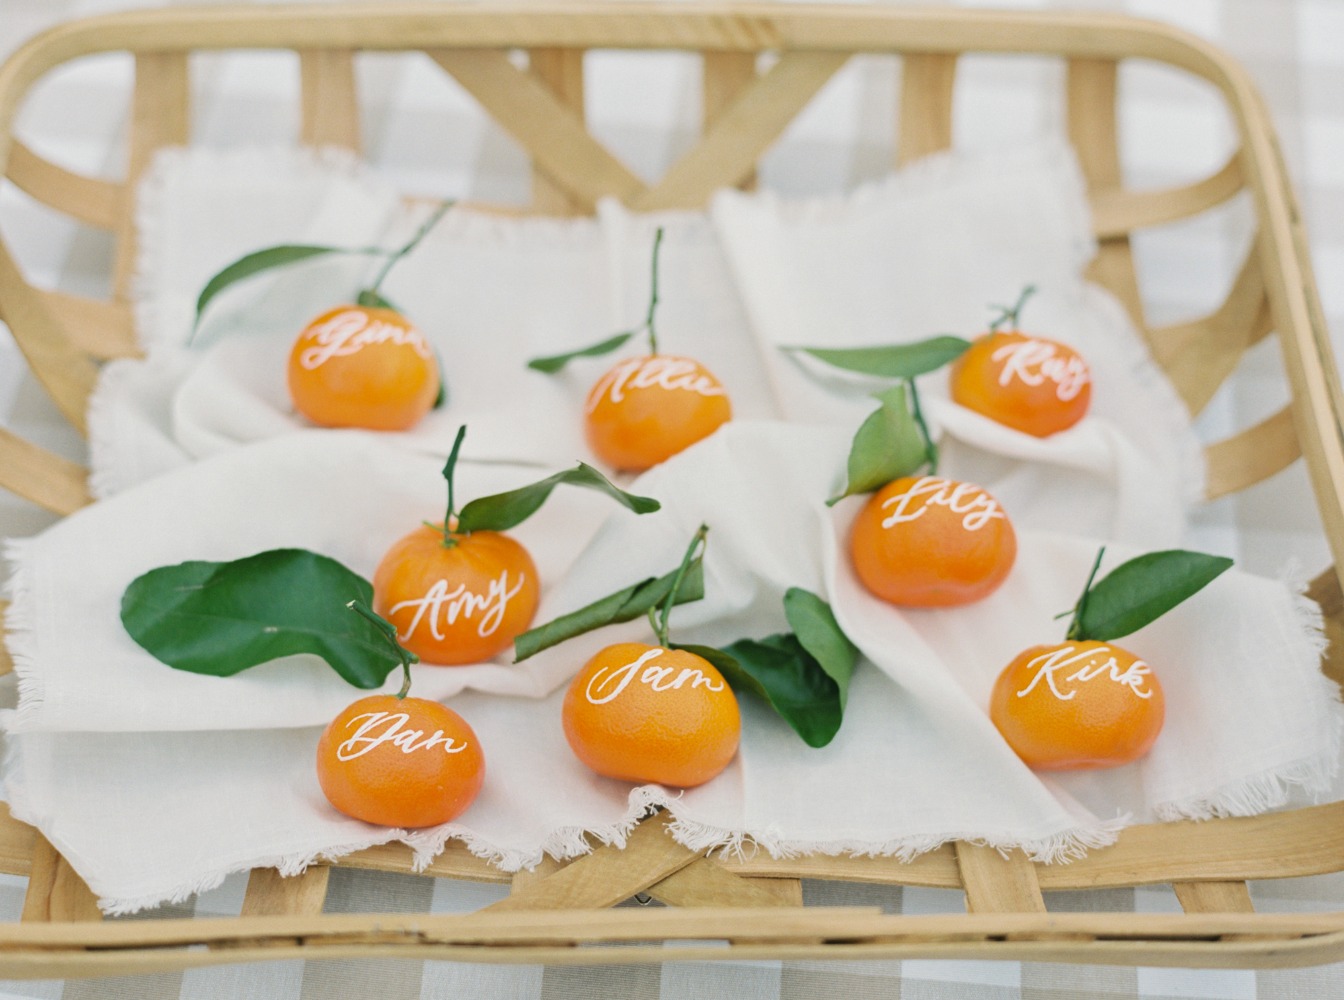 Clementine oranges used as escort cards